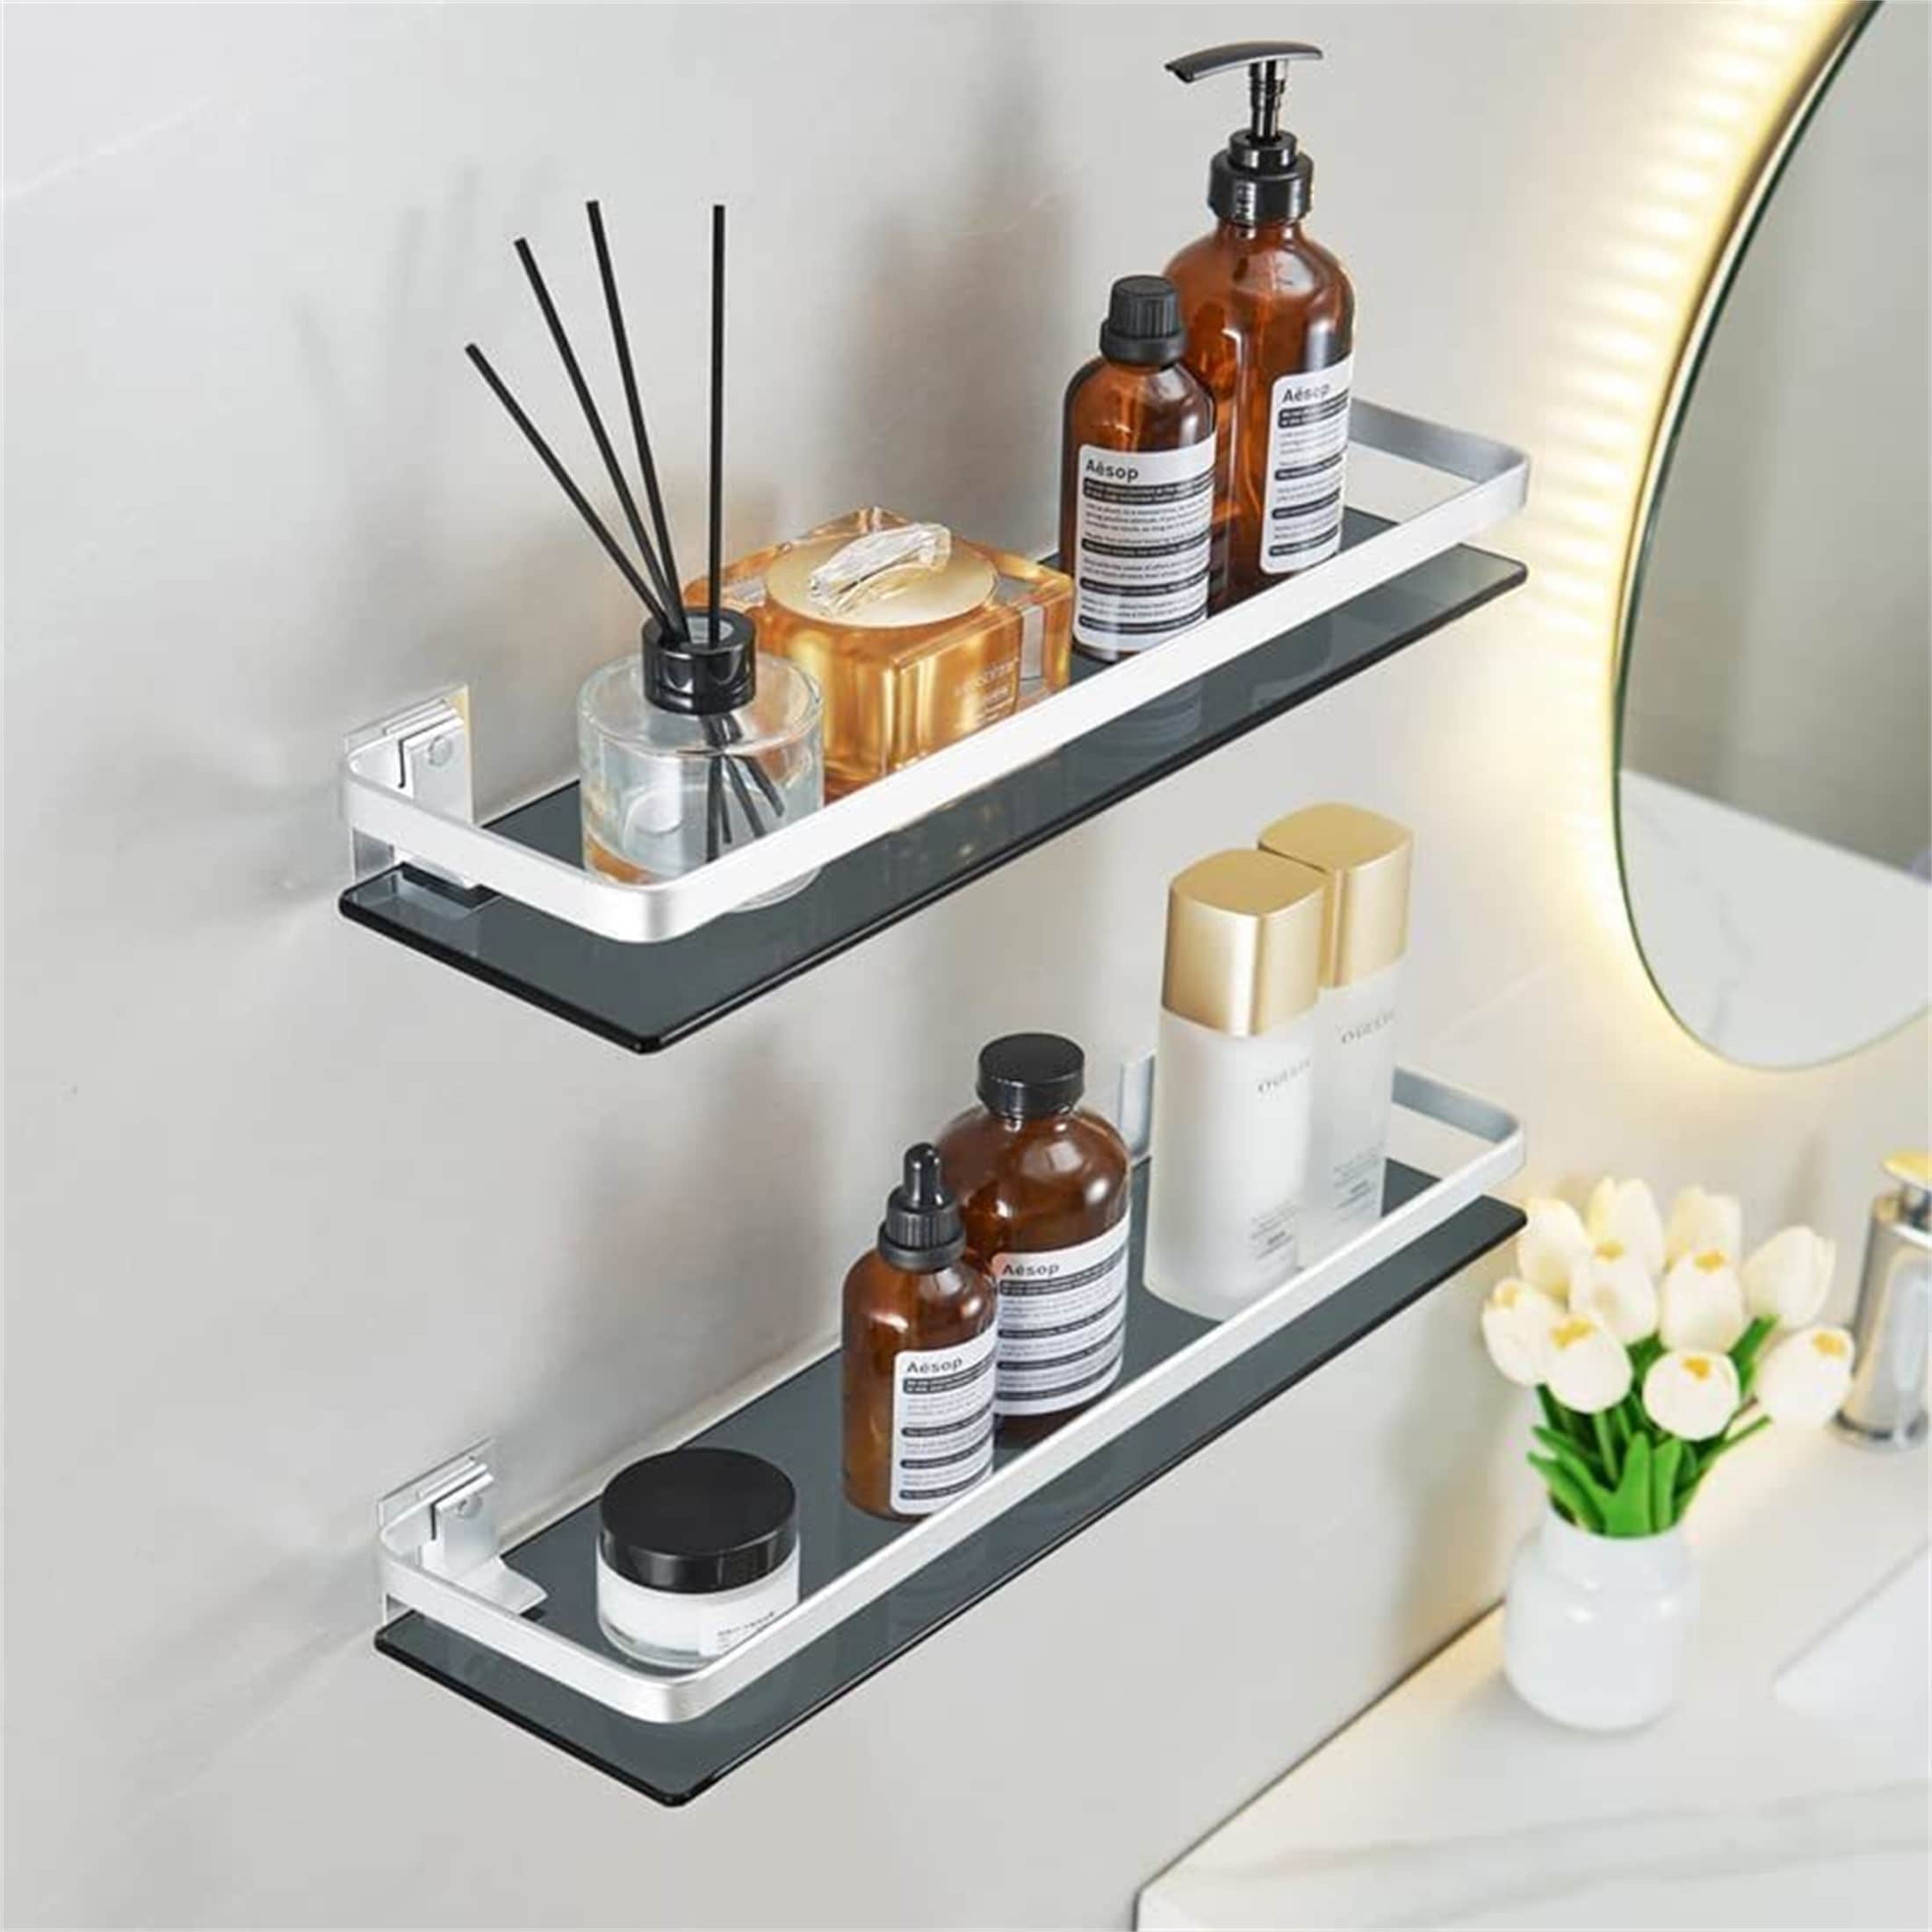 https://ak1.ostkcdn.com/images/products/is/images/direct/64c7b854abb86599ae45491b3b0ccc7996ffcd12/Silver-Bathroom-Tempered-Glass-Wall-Shelves.jpg